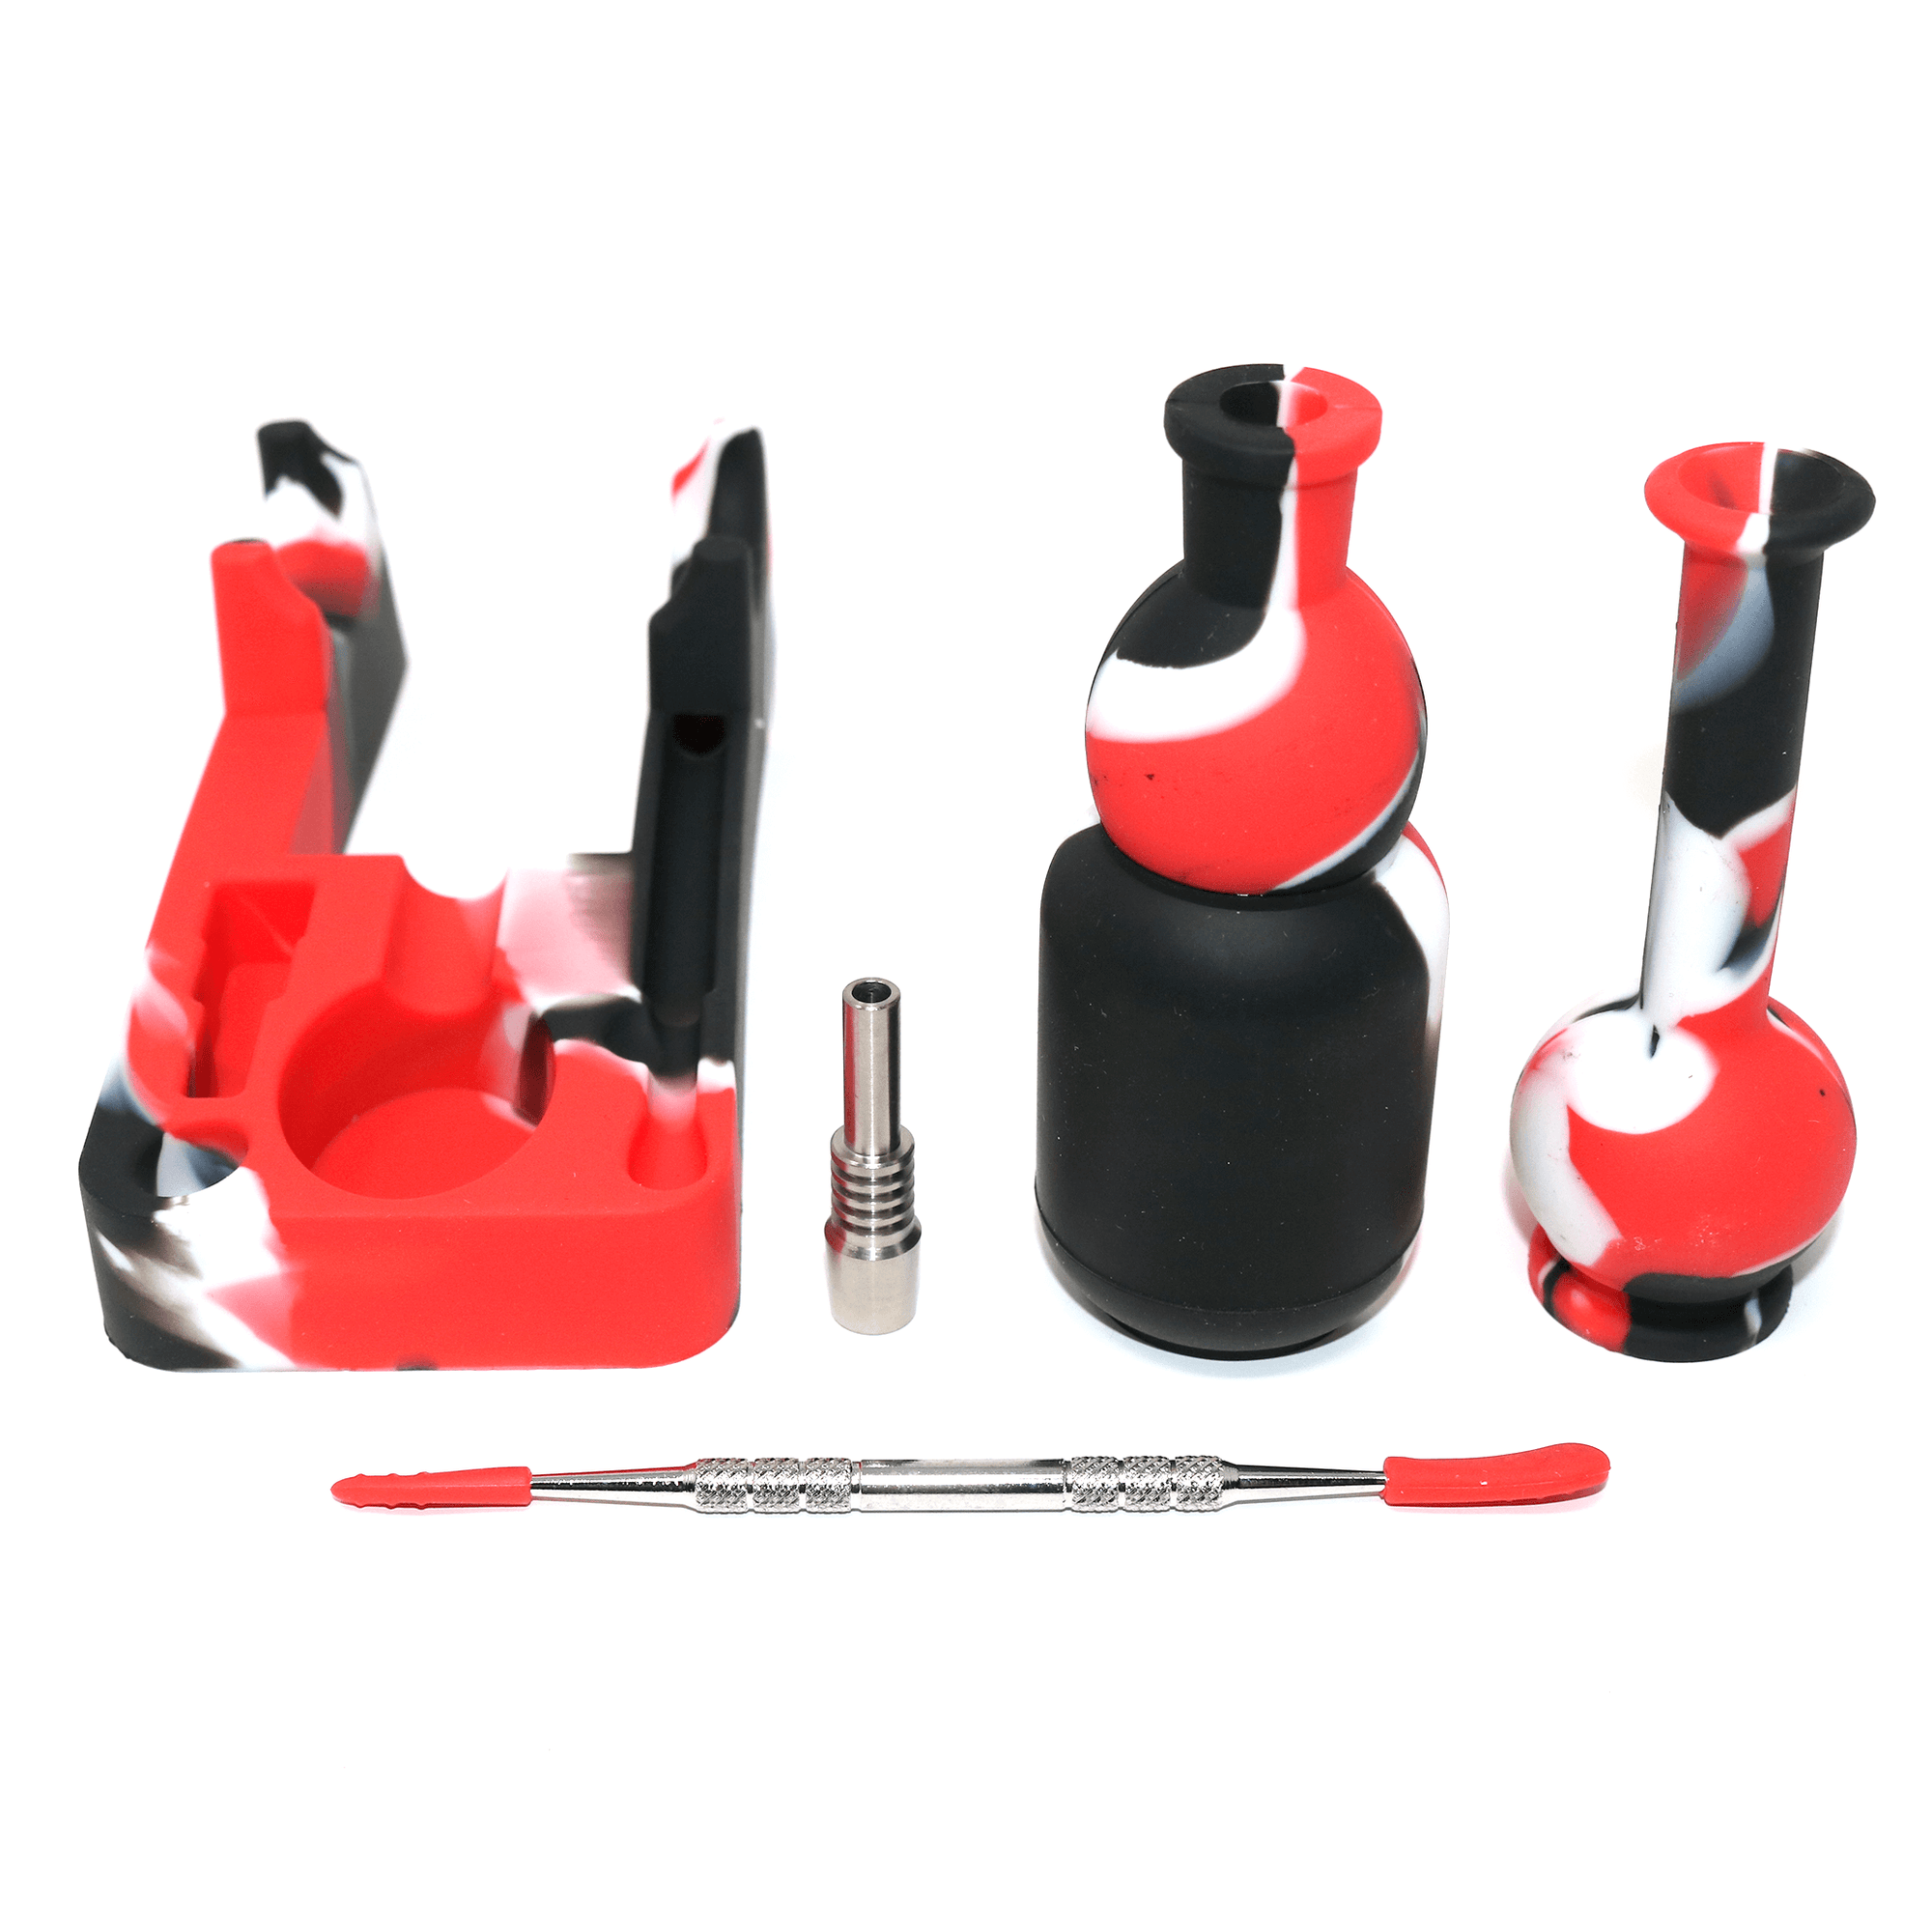 Silicone Nectar Collector | White, Black & Red Expanded Parts View | Dabbing Warehouse